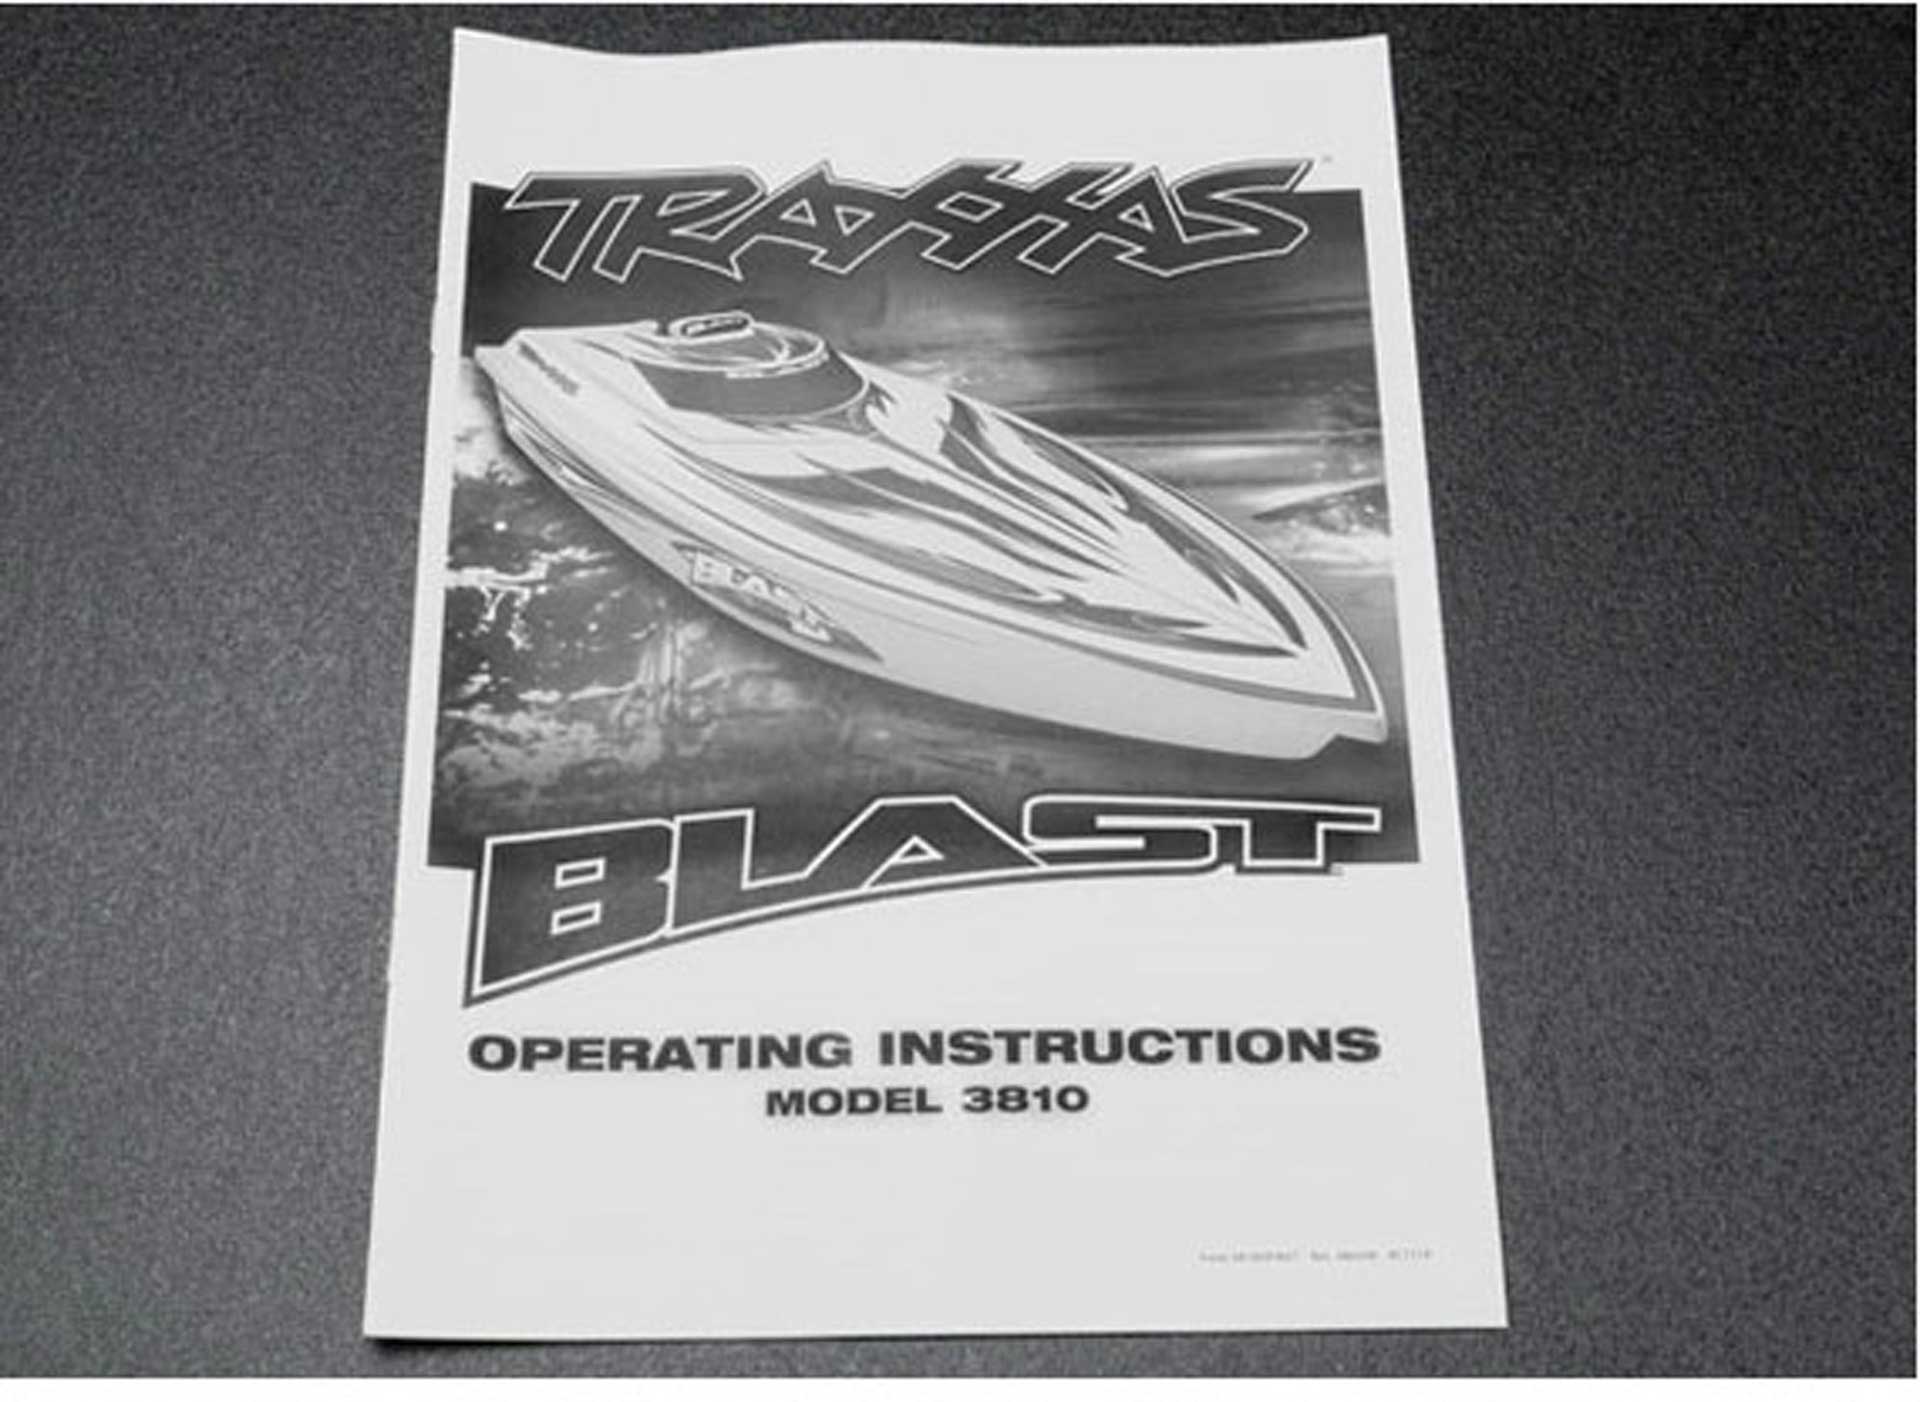 TRAXXAS OWNERS MANUAL, BLAST